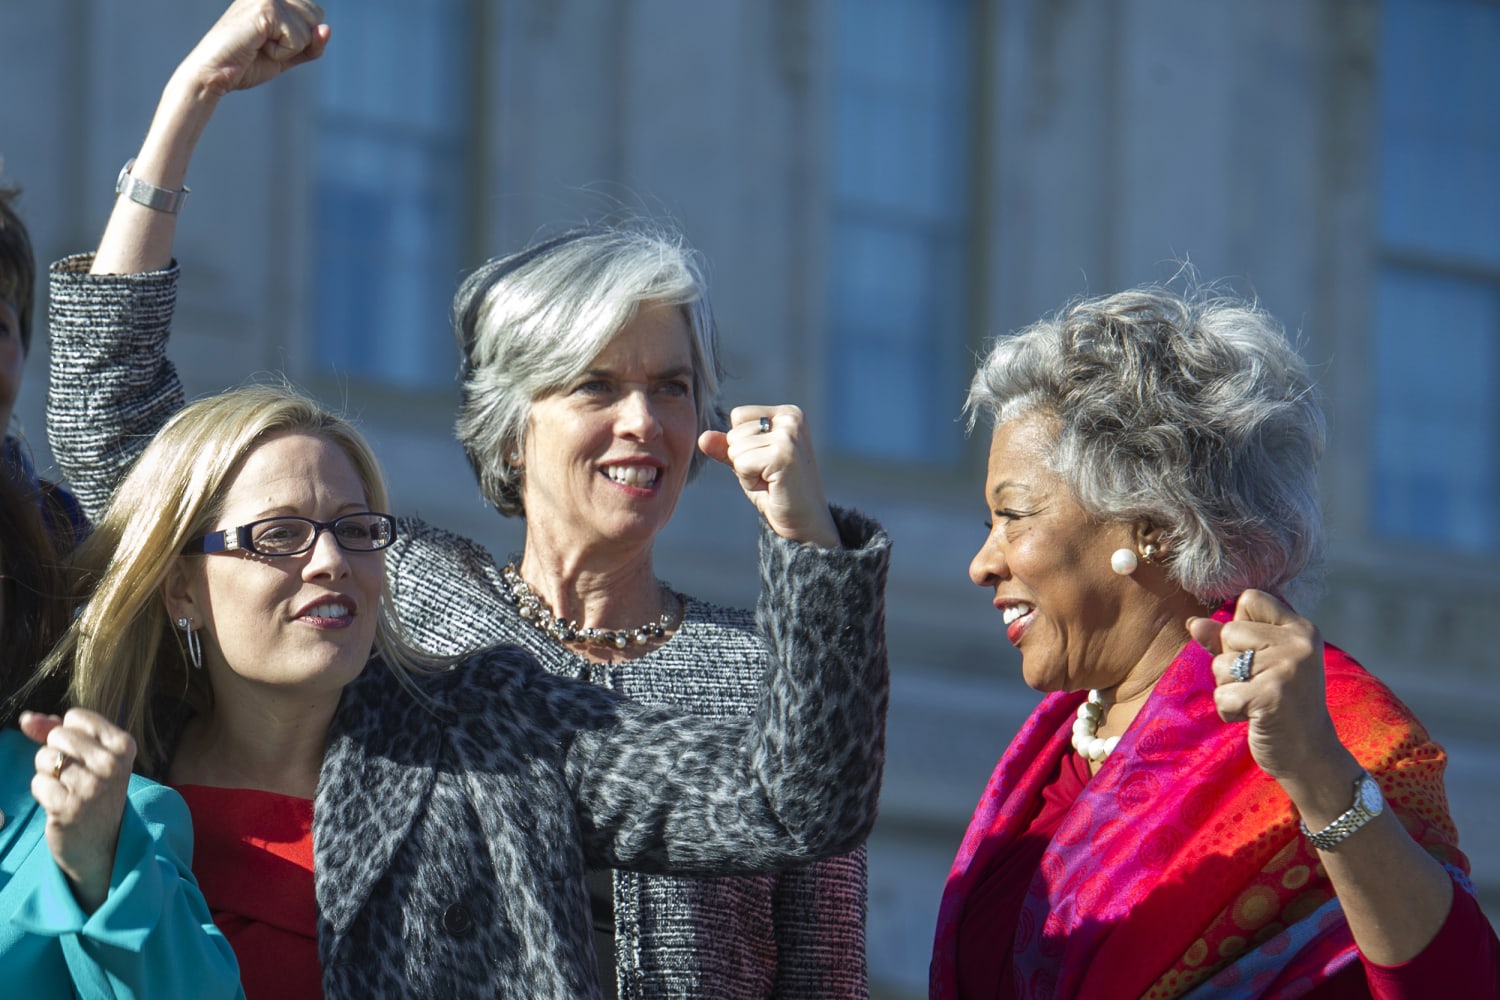 I want my voice heard Women plot runs for office in record numbers